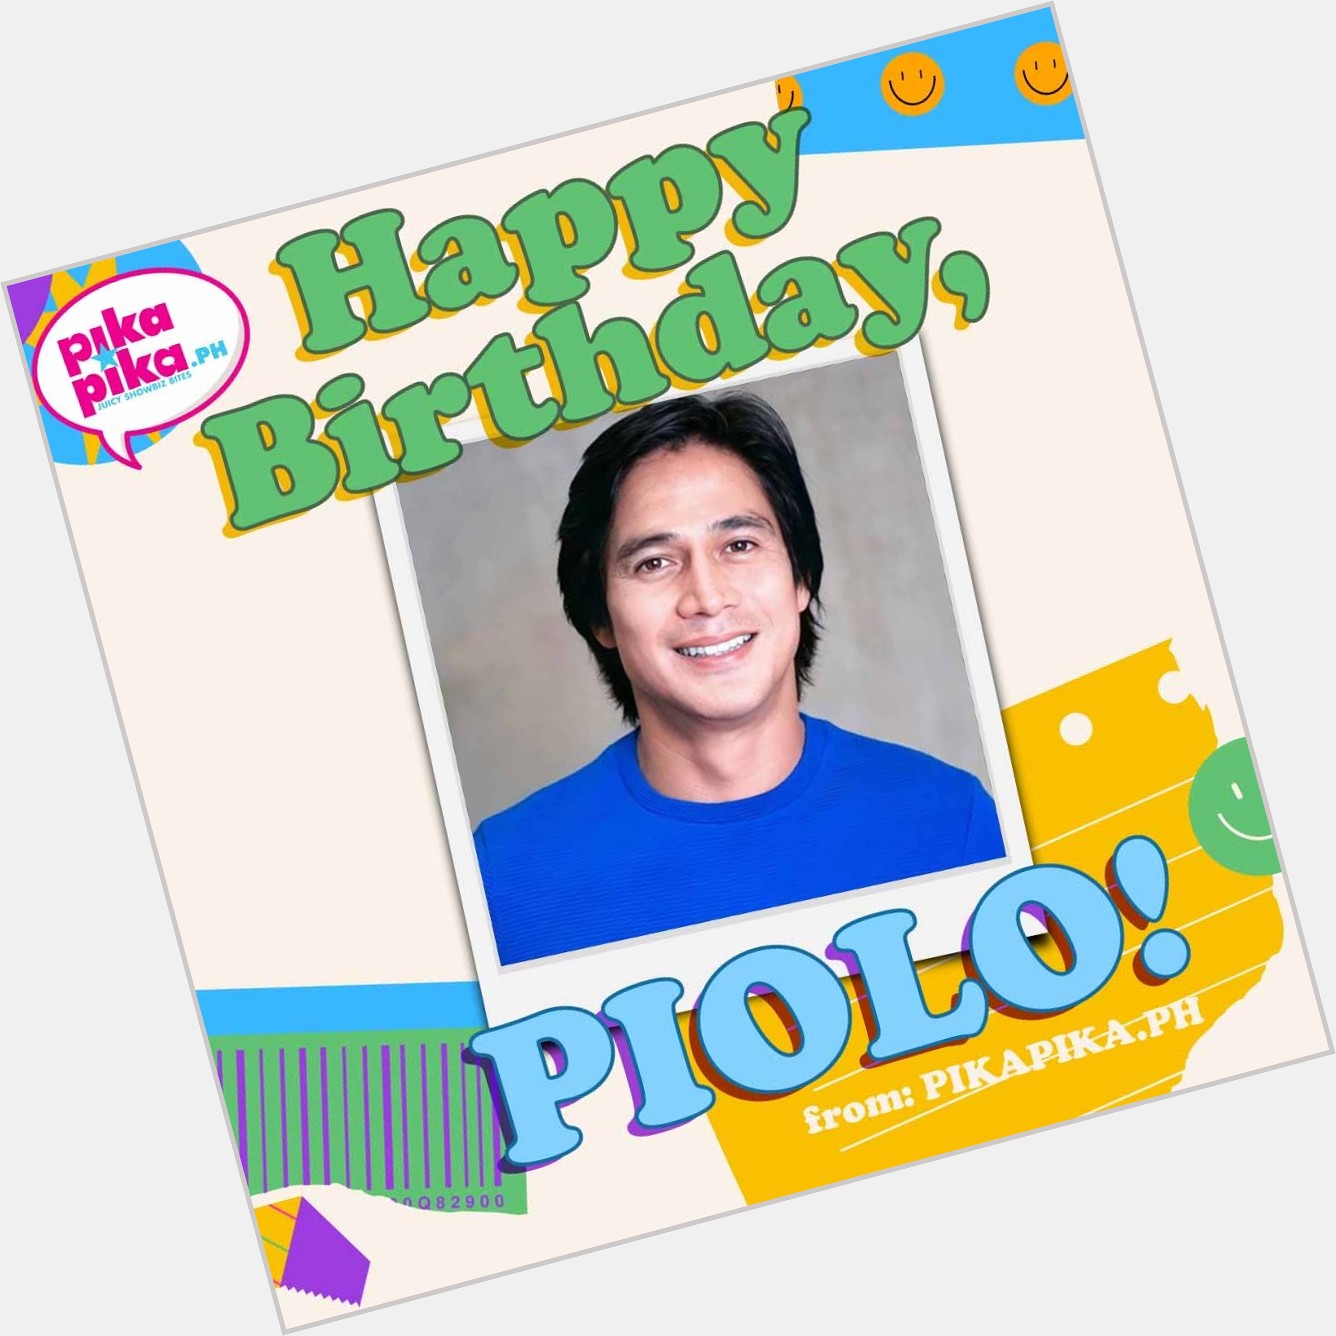 Happy birthday, Piolo Pascual! May you have a wonderful day and a great year ahead. 